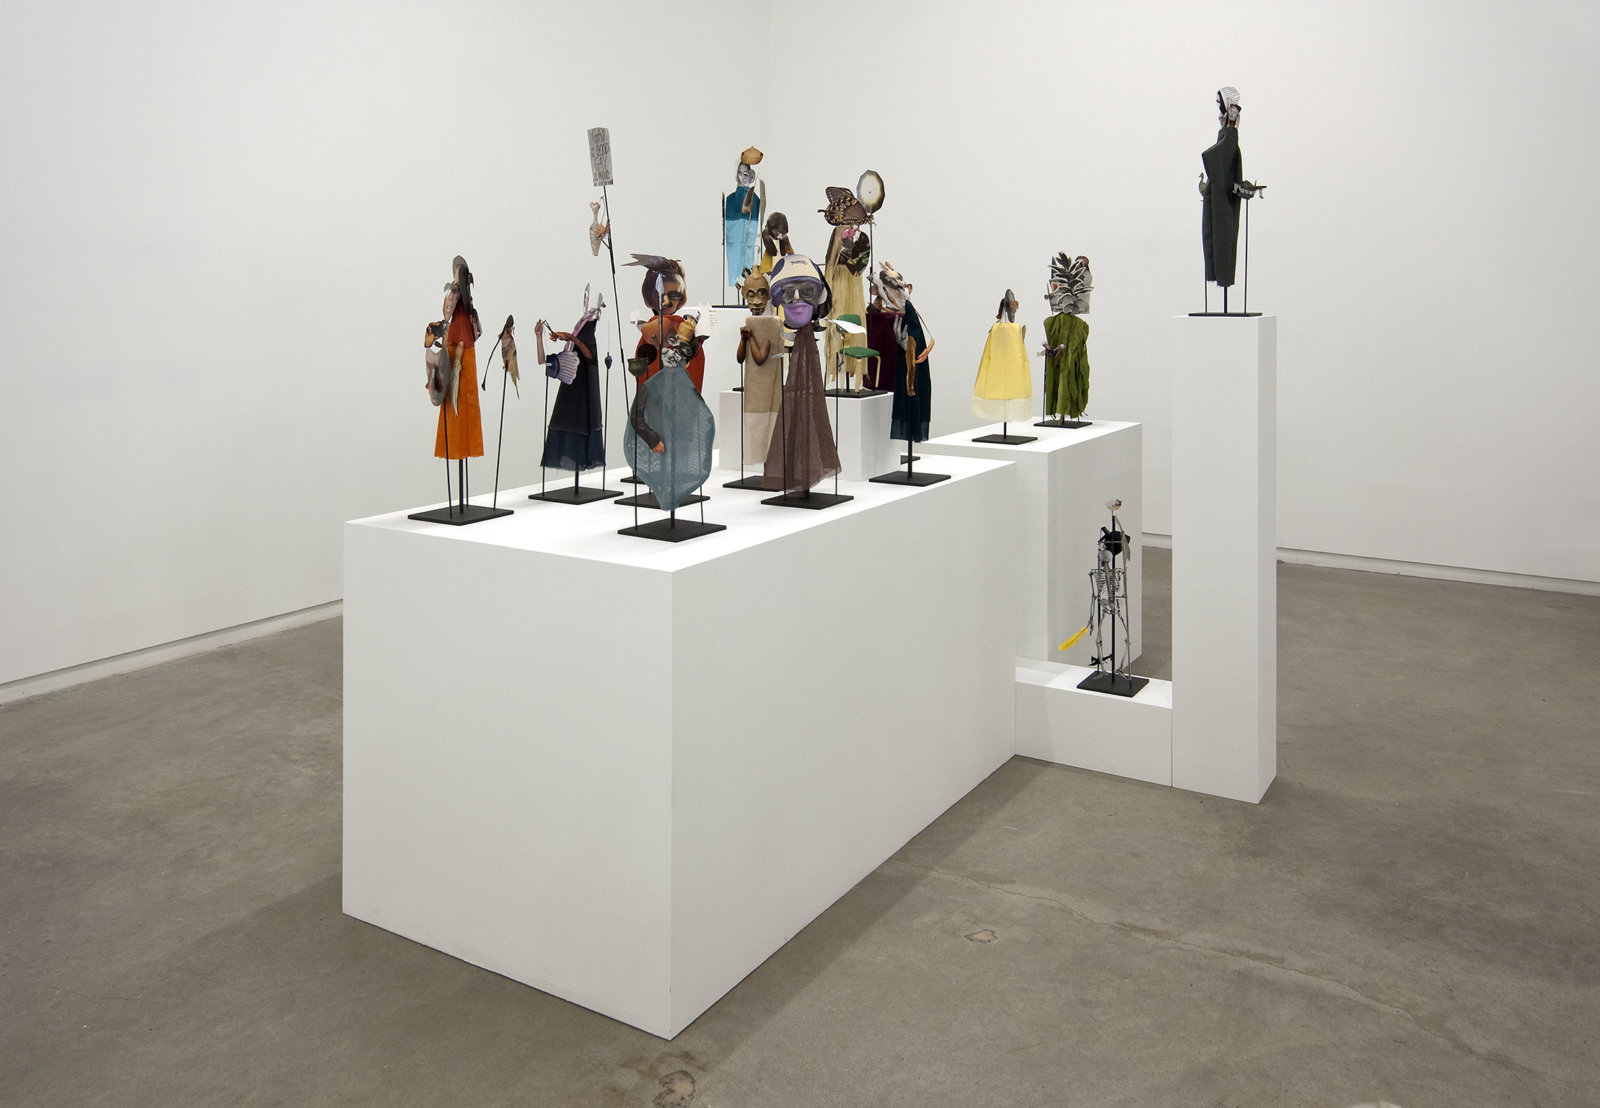 Geoffrey Farmer, The Surgeon and the Photographer, 2009, paper, textile, wood, metal, 365 figures, each figure approximately: 18 x 5 x 5 in. (45 x 13 x 13 cm)